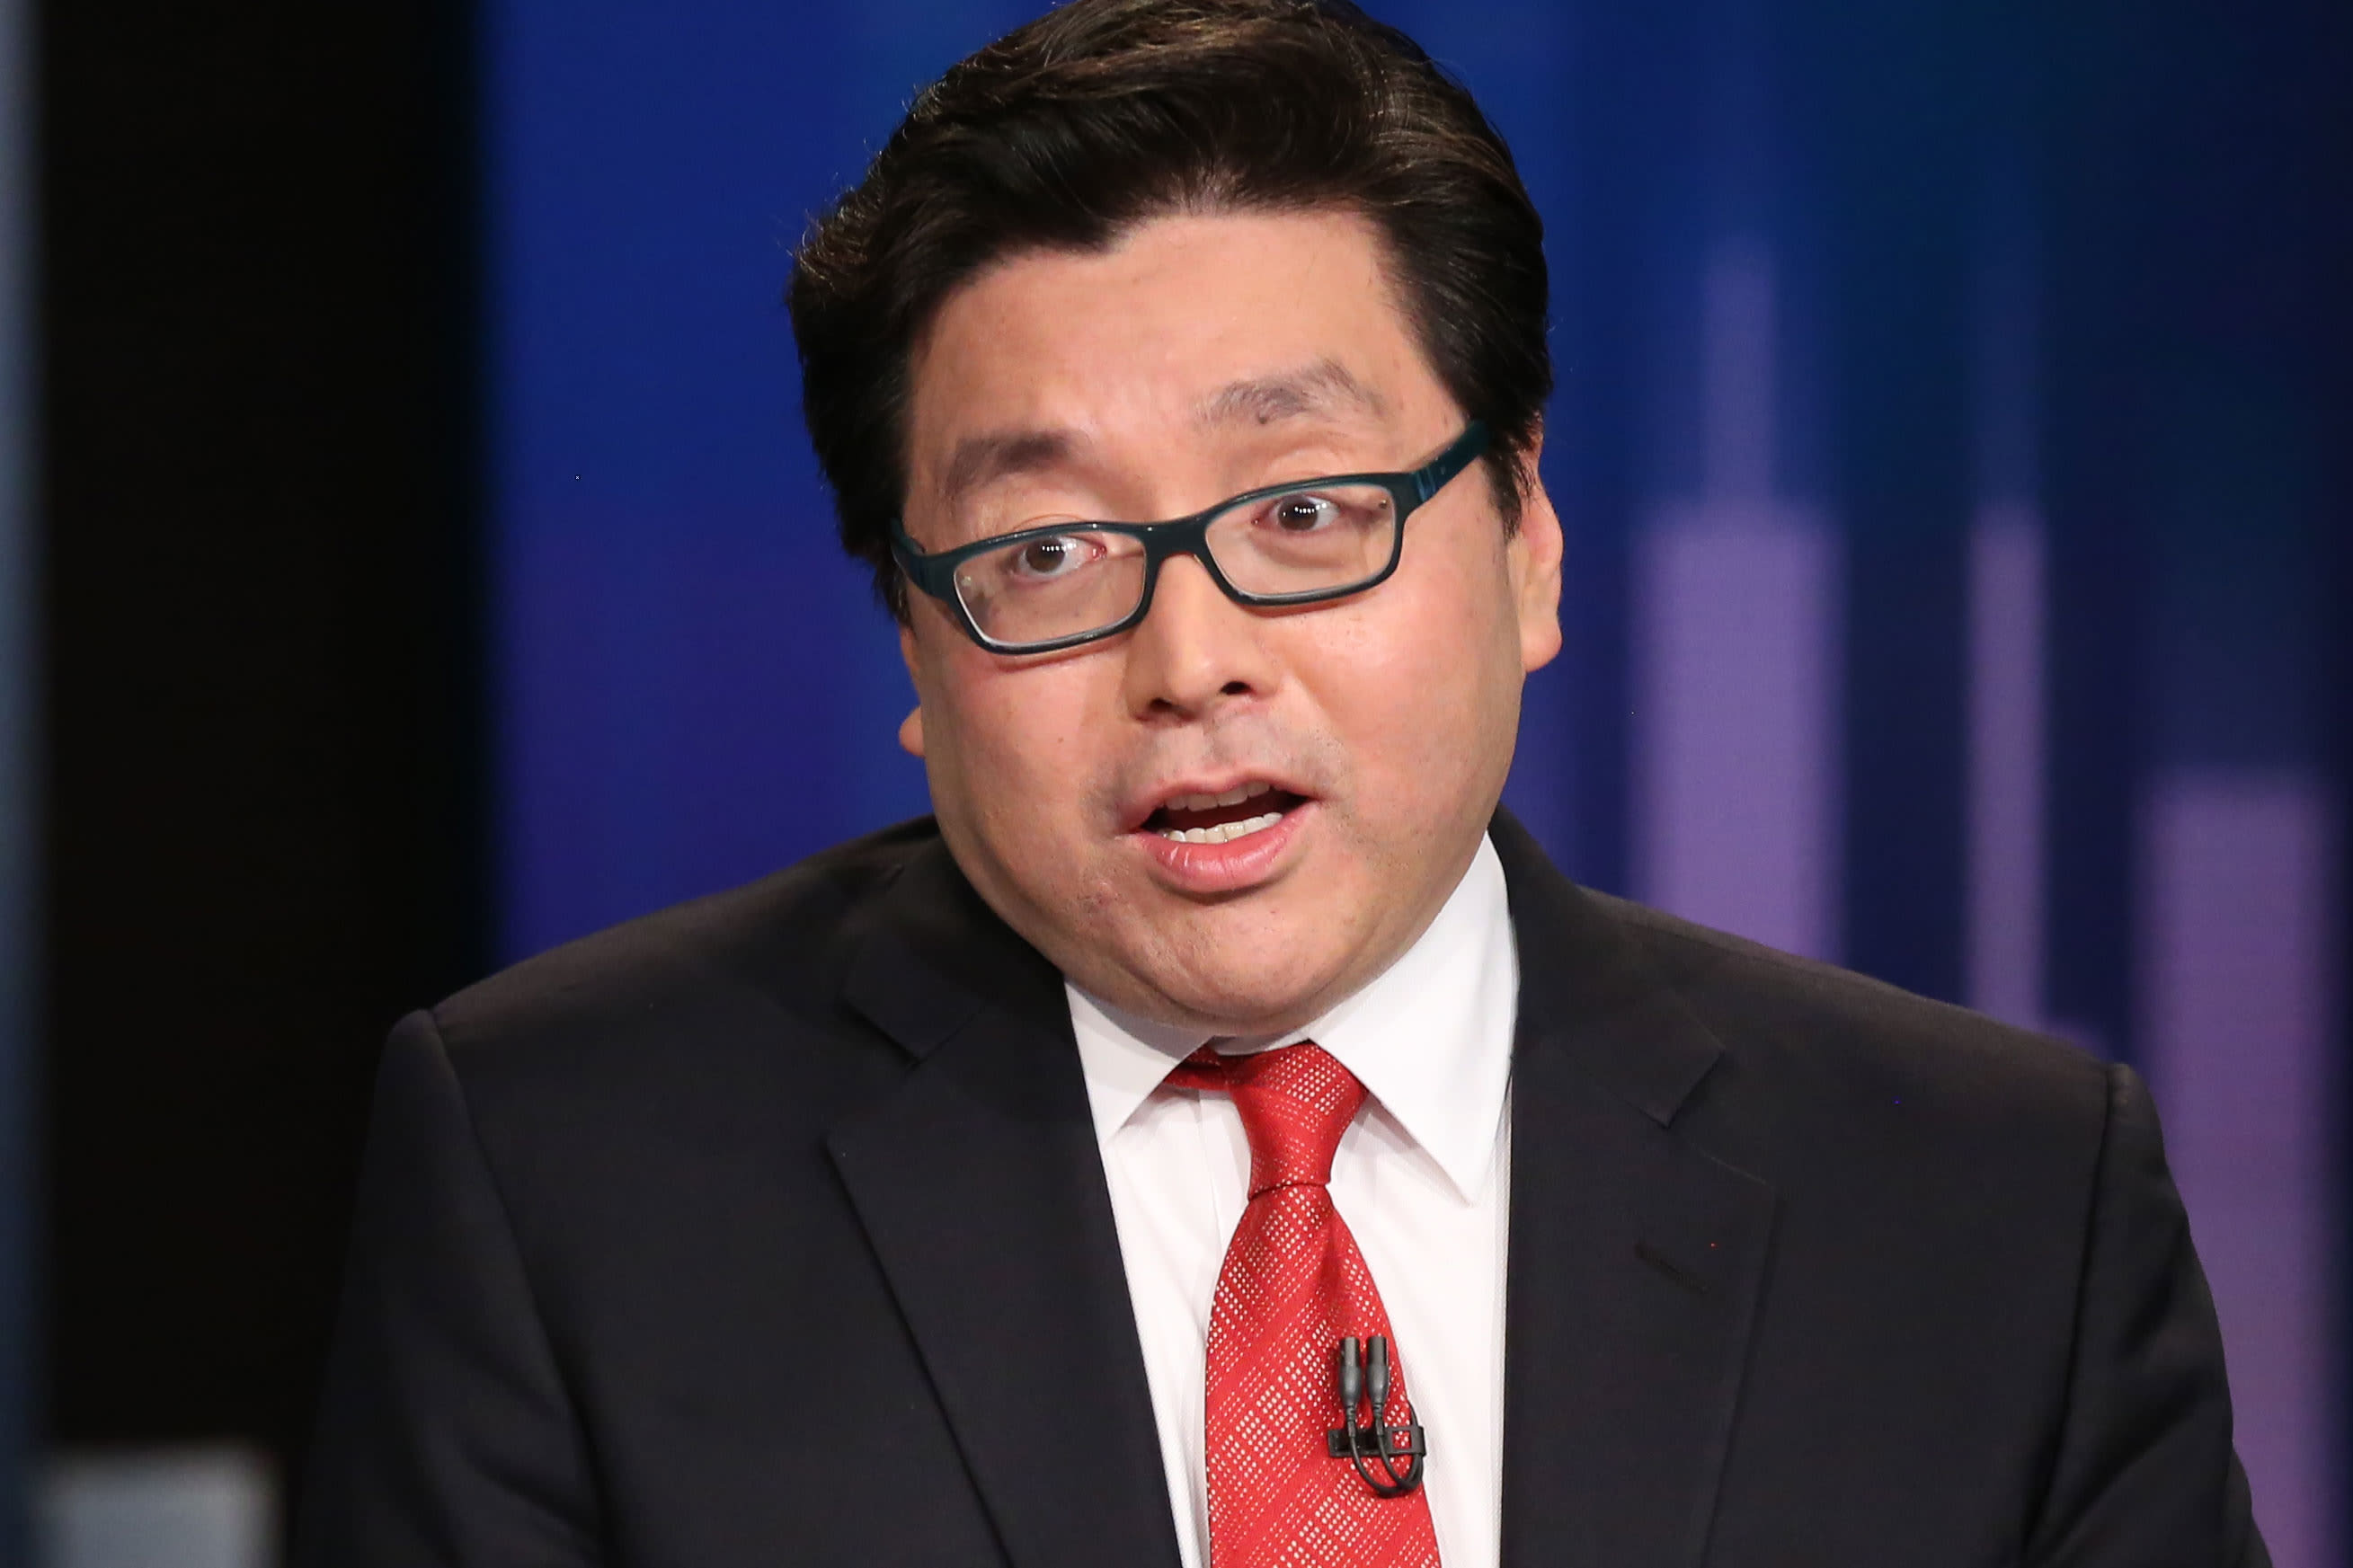 FAANG stocks could soar up to 50% this year, says Fundstrat's Tom Lee